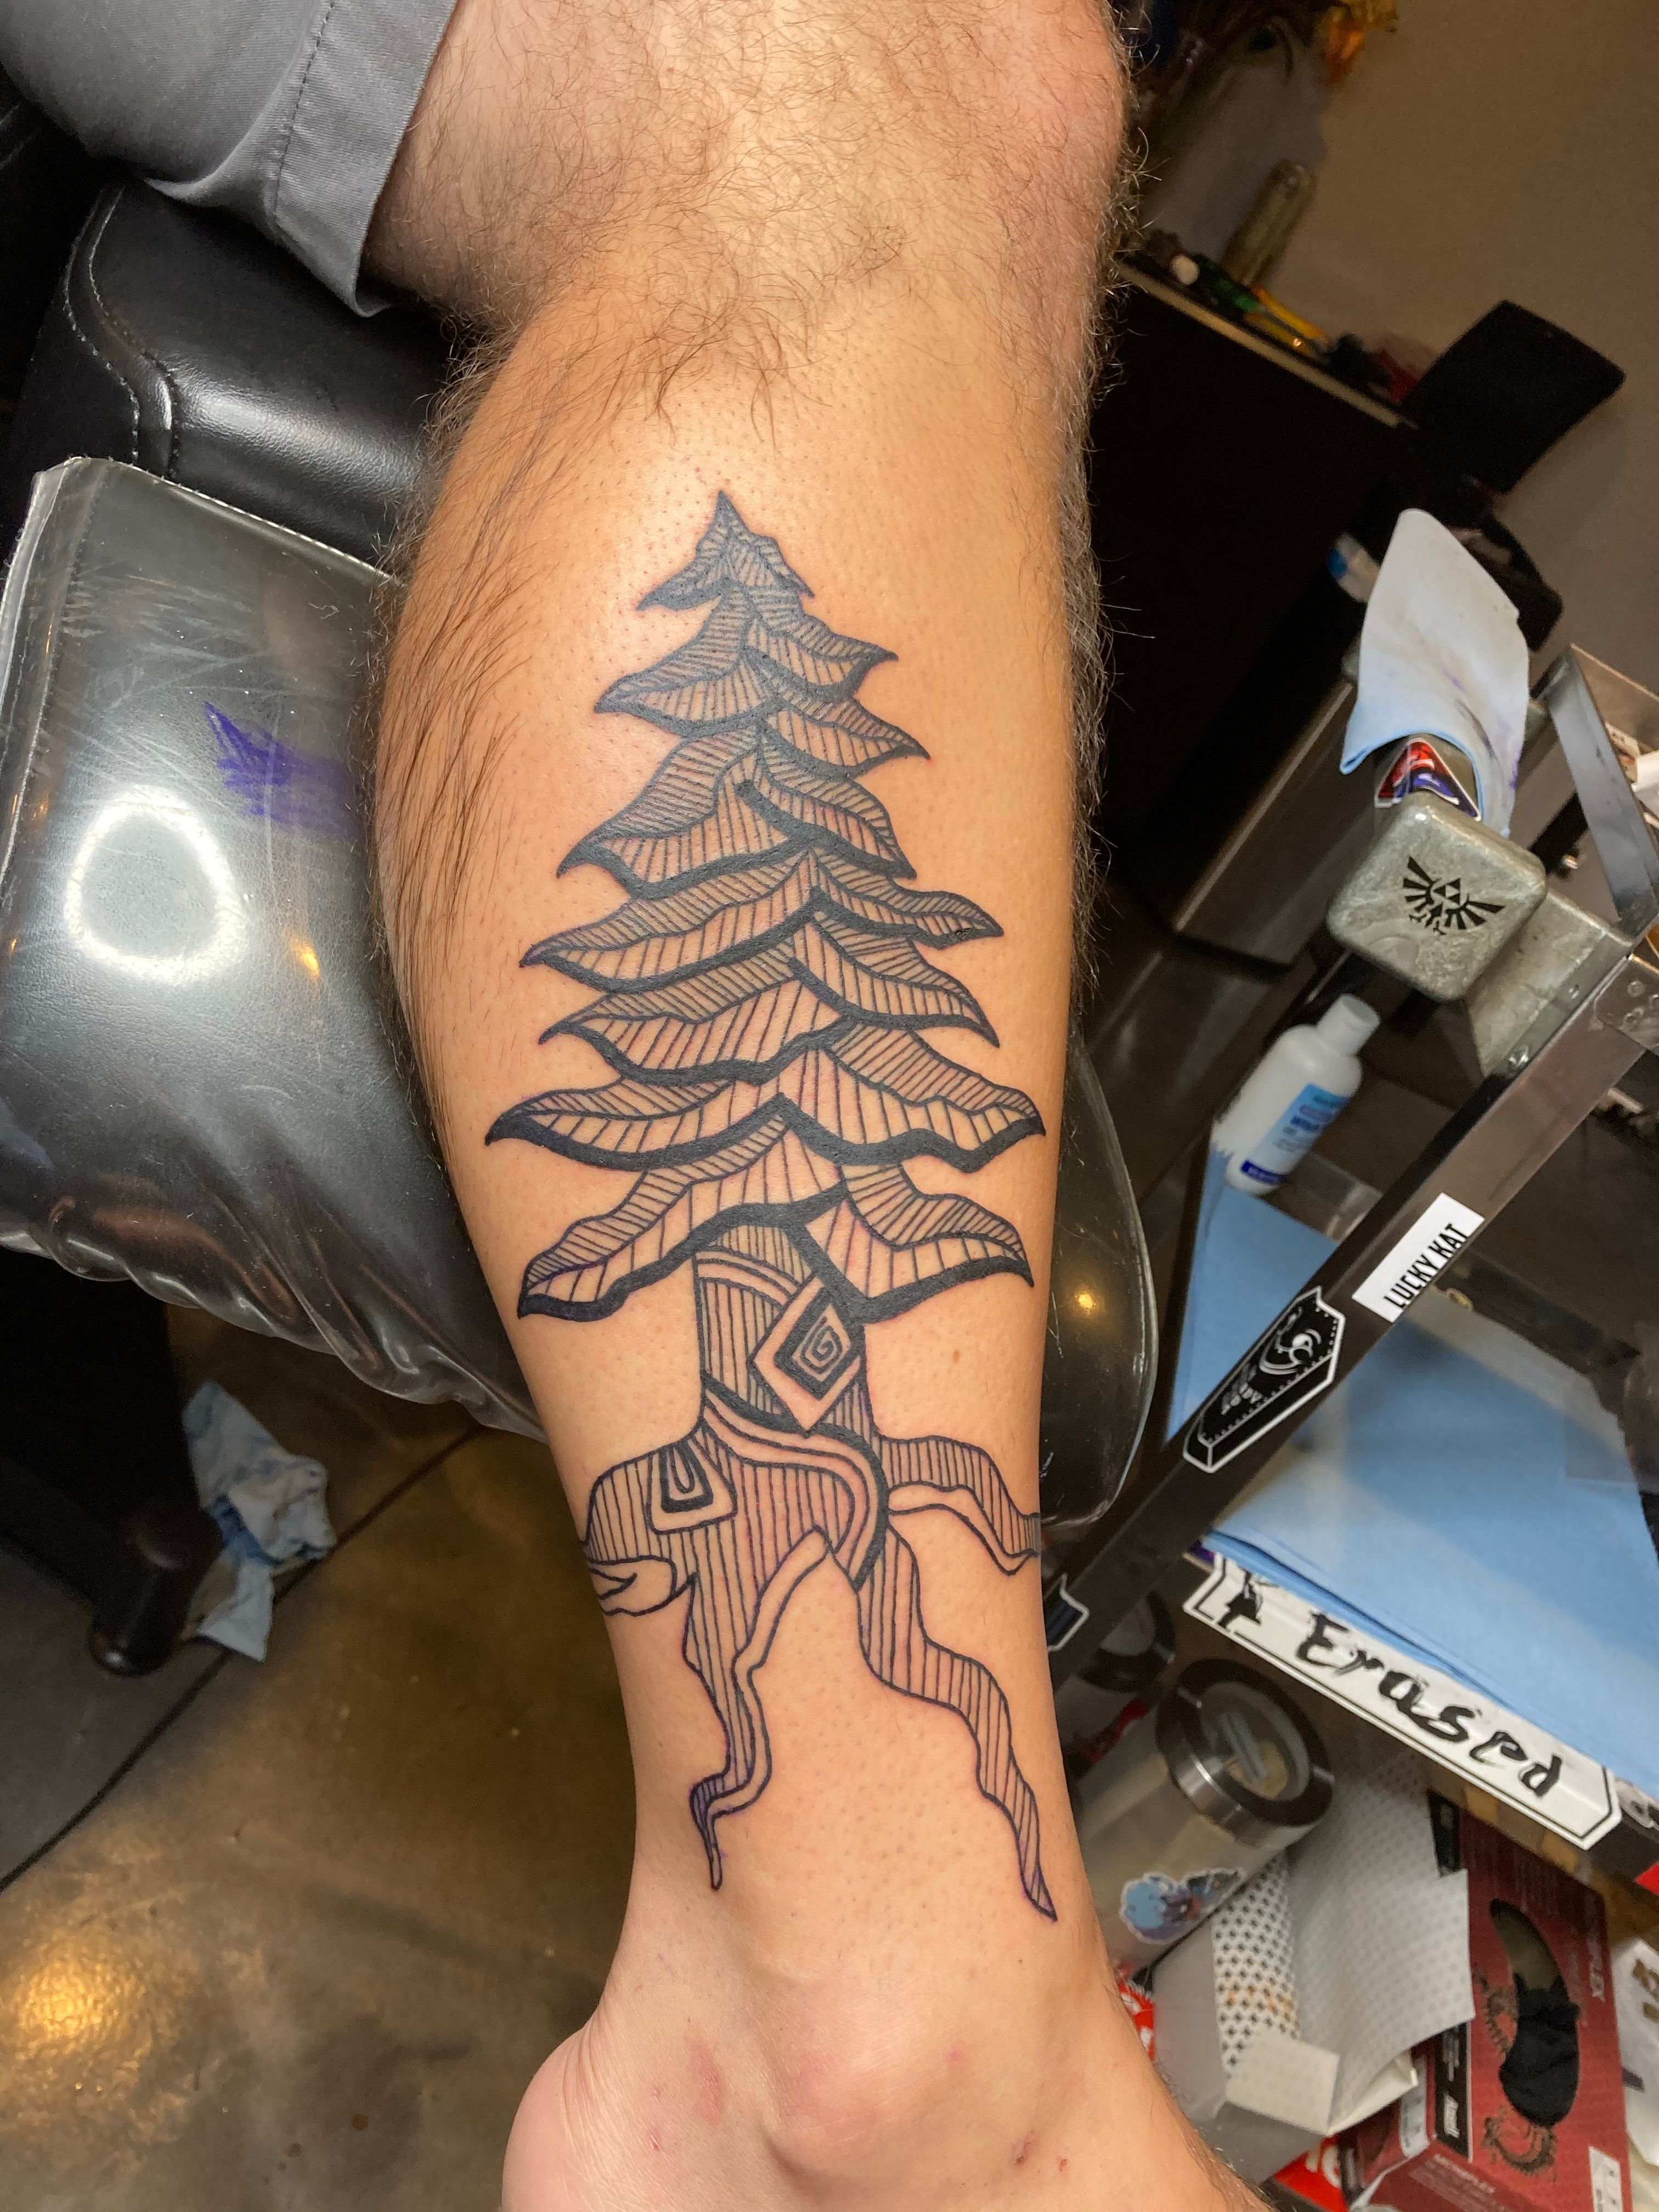 Tattoo uploaded by Angela  Sun from the Uruguayan flag for my mom cedar  tree from the Lebanese flag for my dad and maple leaf from the Canadian  flag for my brother